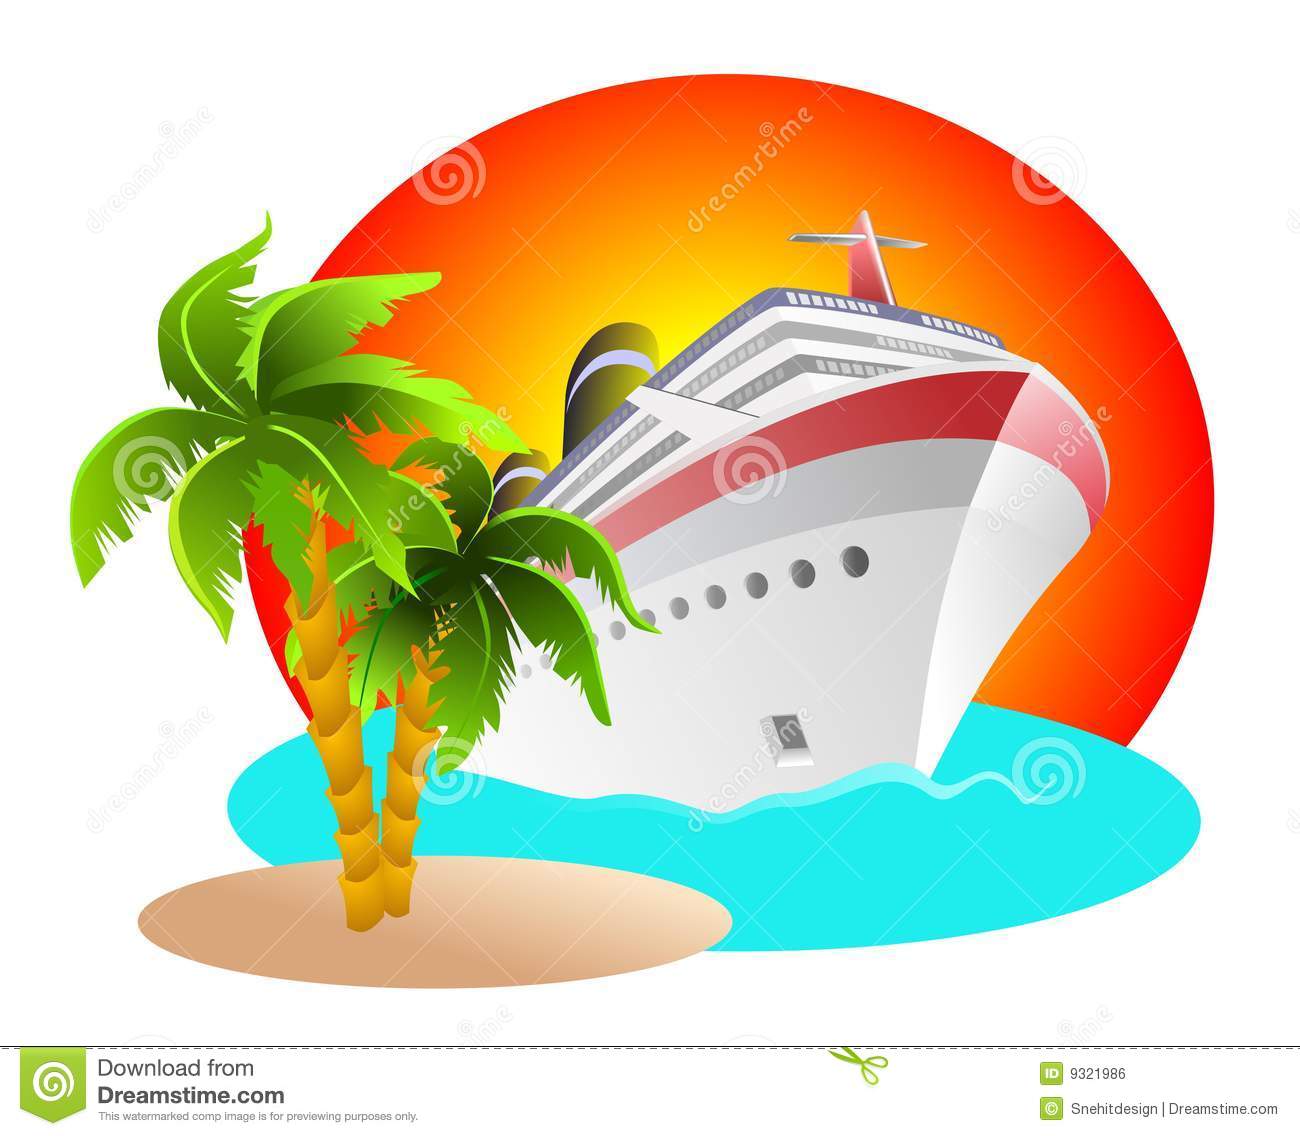 Cruise Clipart Royalty Free S - Cruise Clip Art